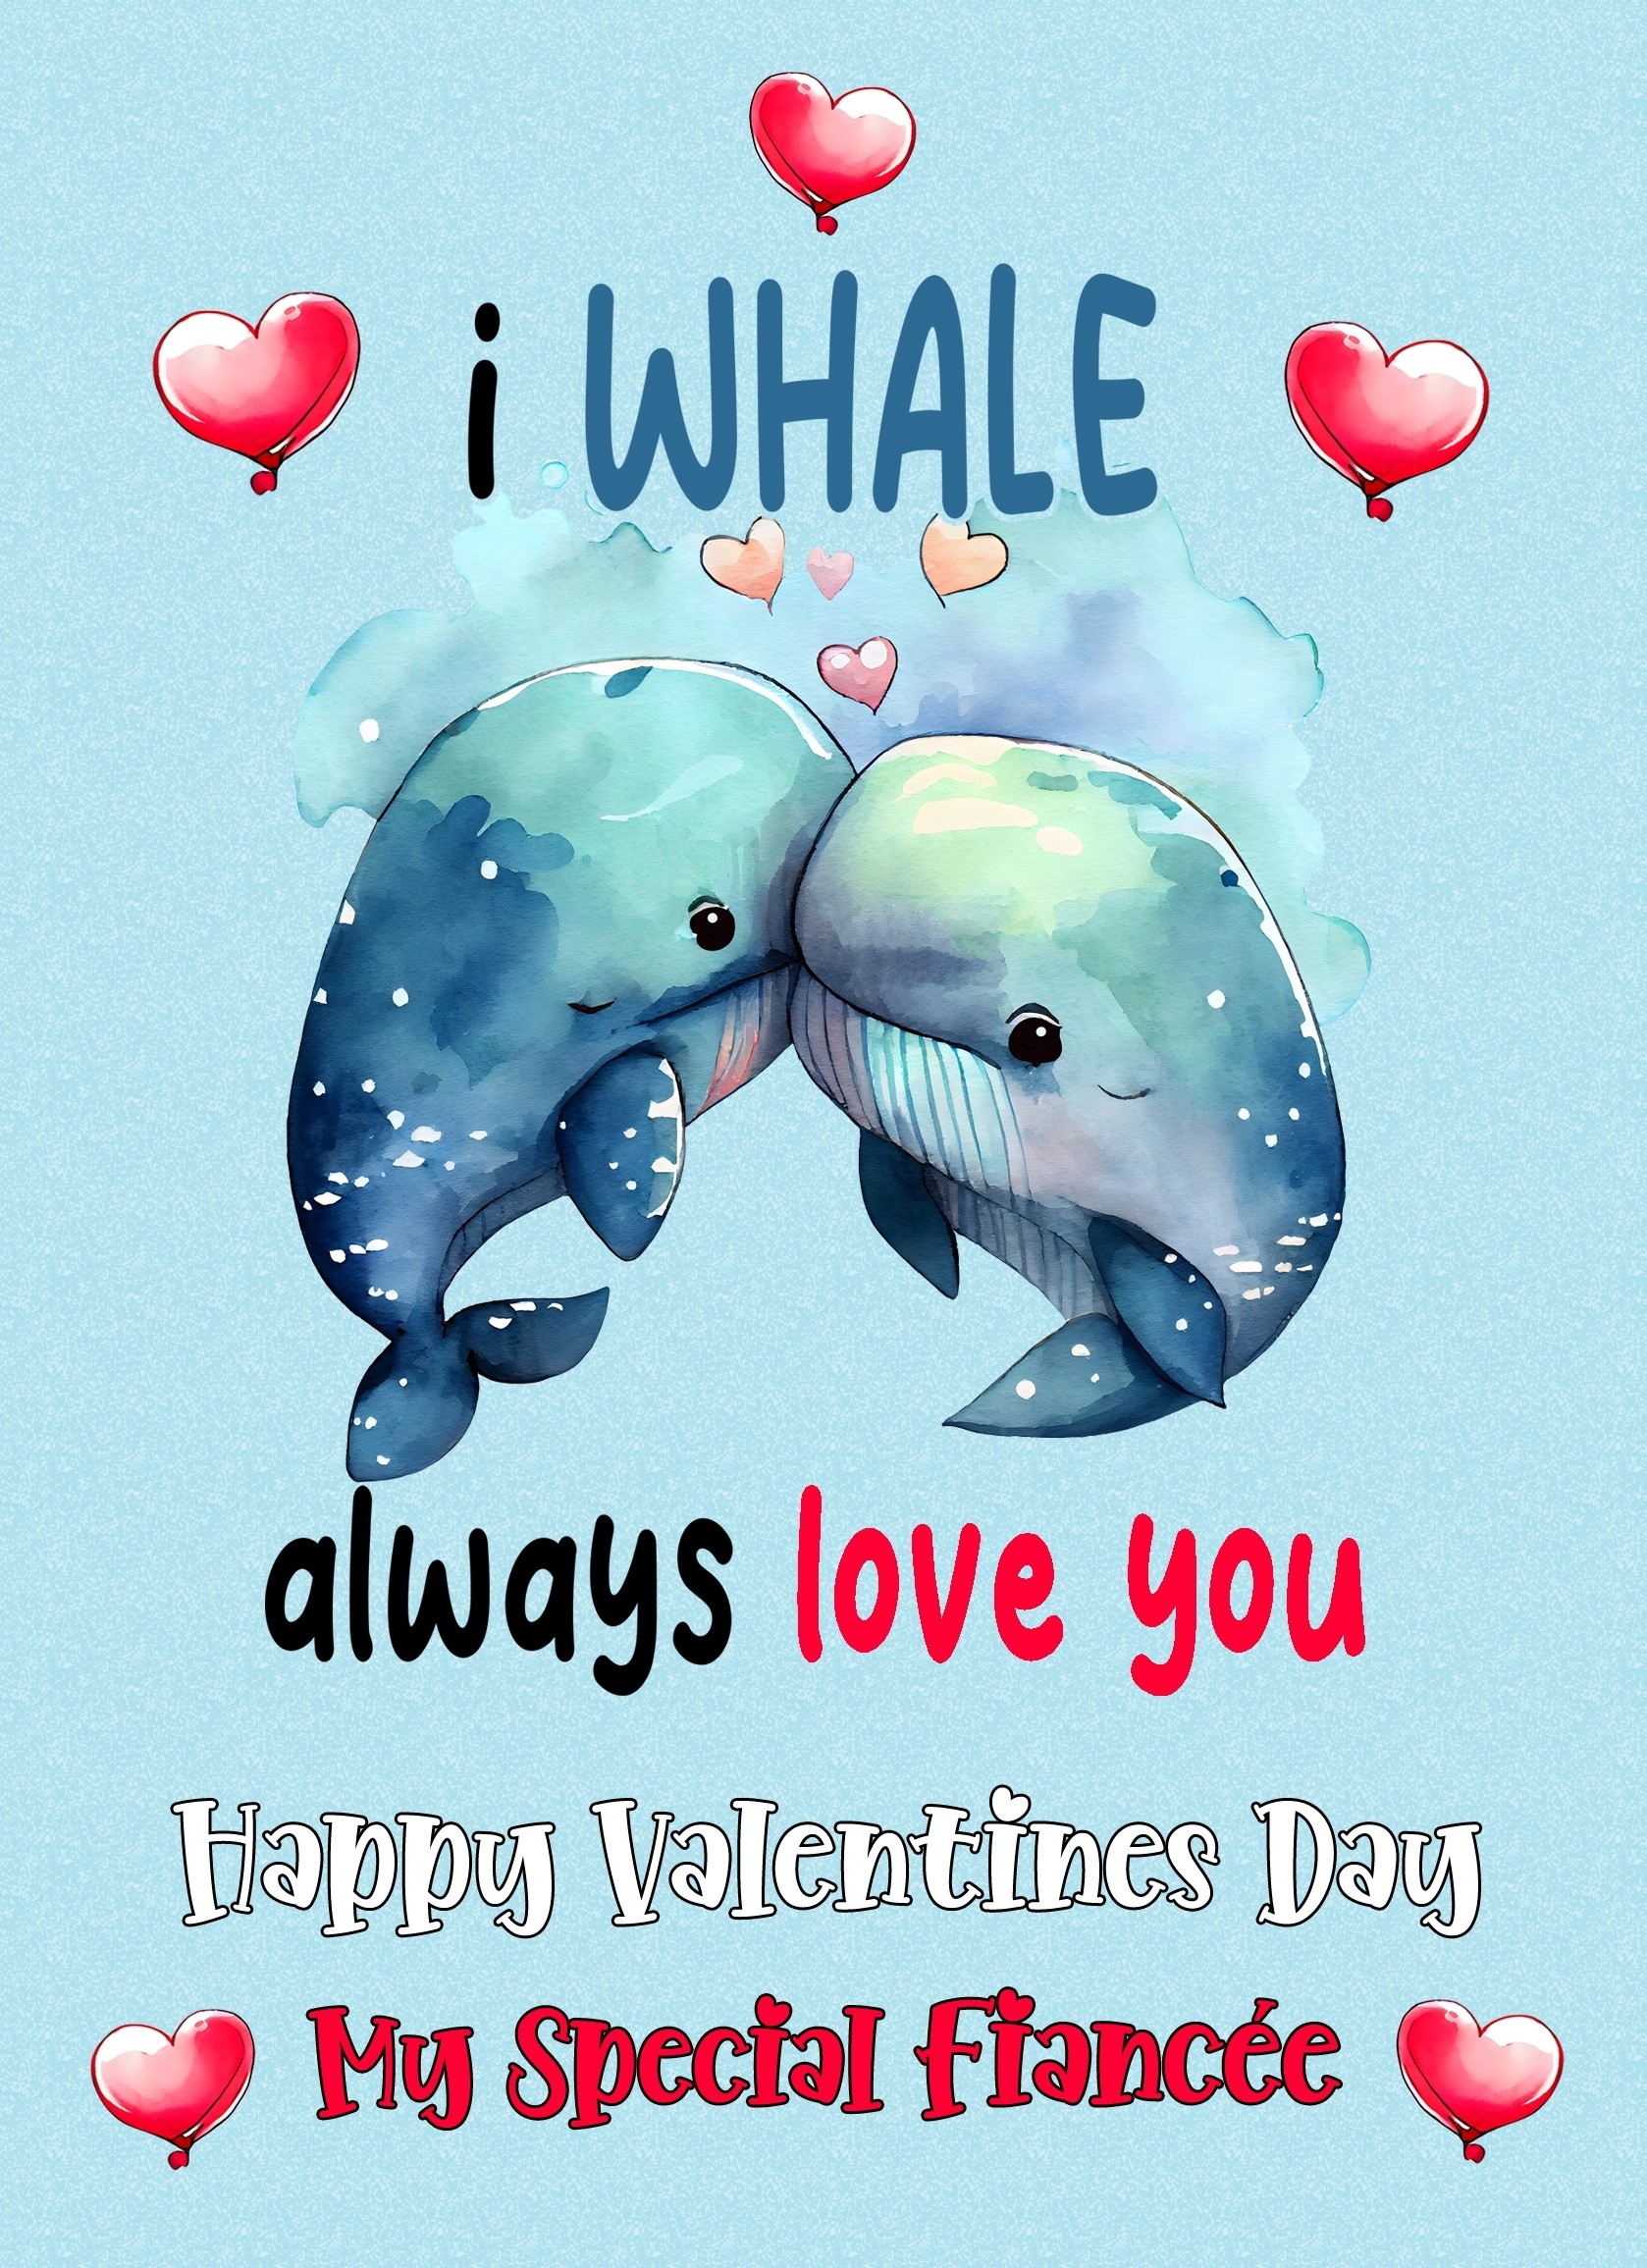 Funny Pun Valentines Day Card for Fiancee (Whale)